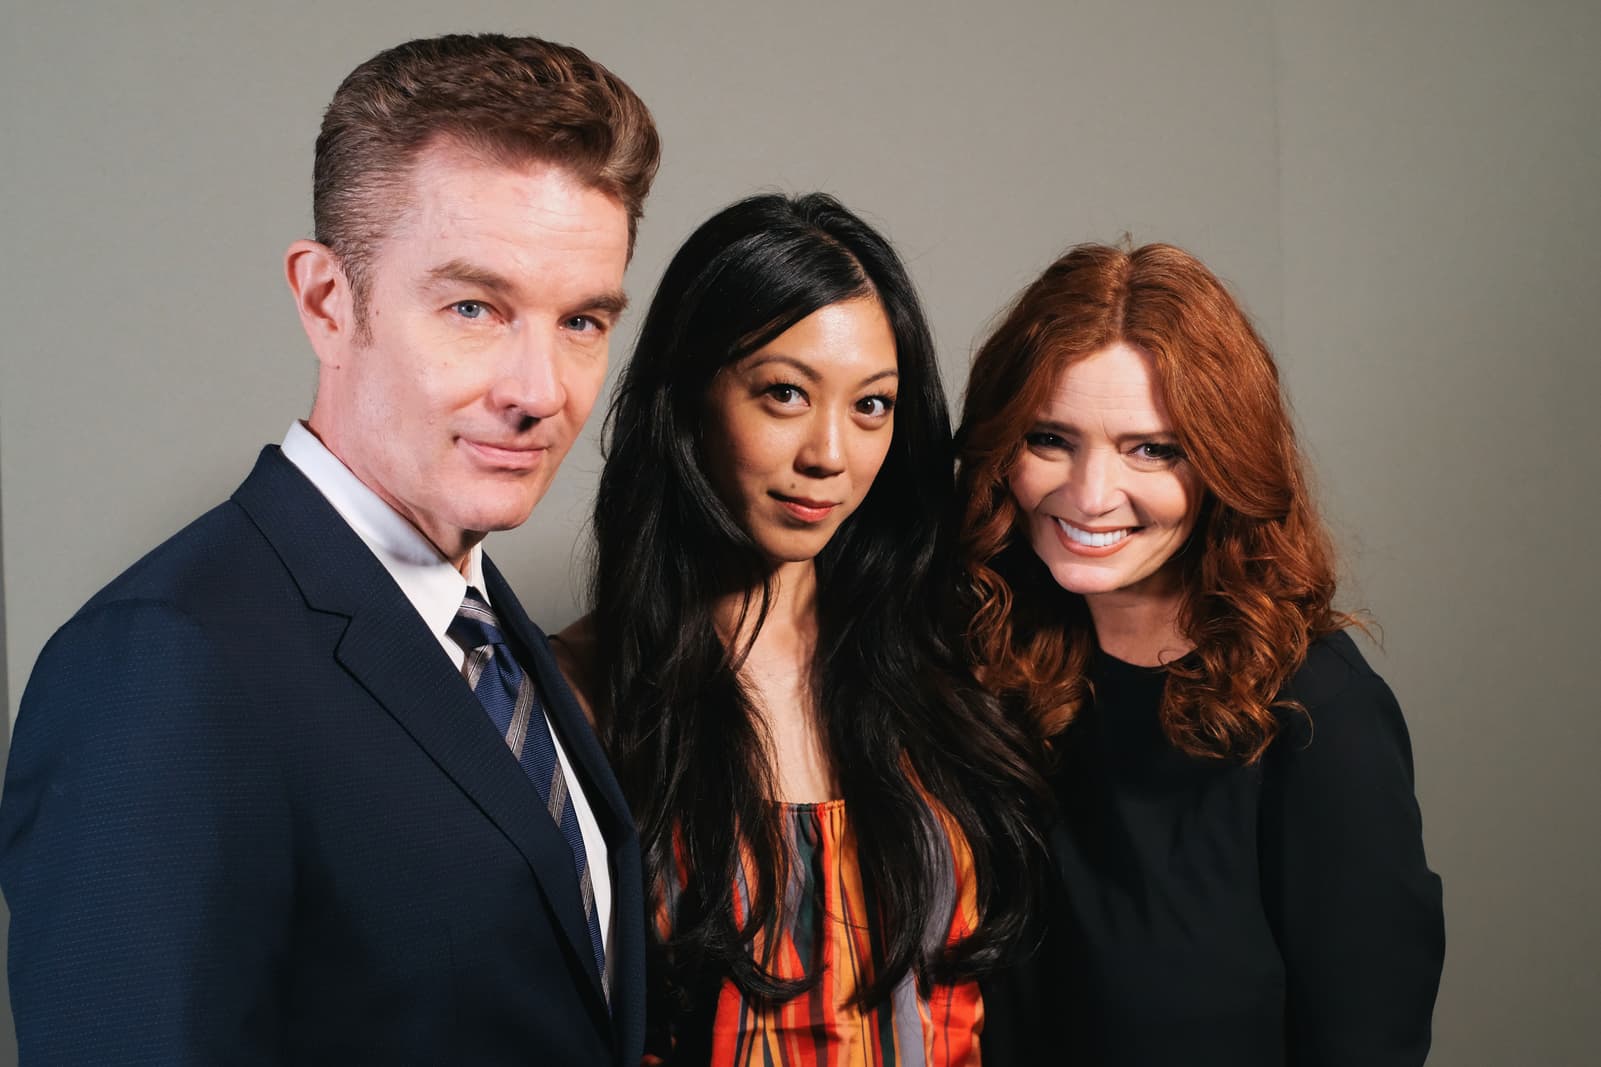 The Marvel After Show - James Marsters, Brittany Ishibashi, and Brigid Brannagh